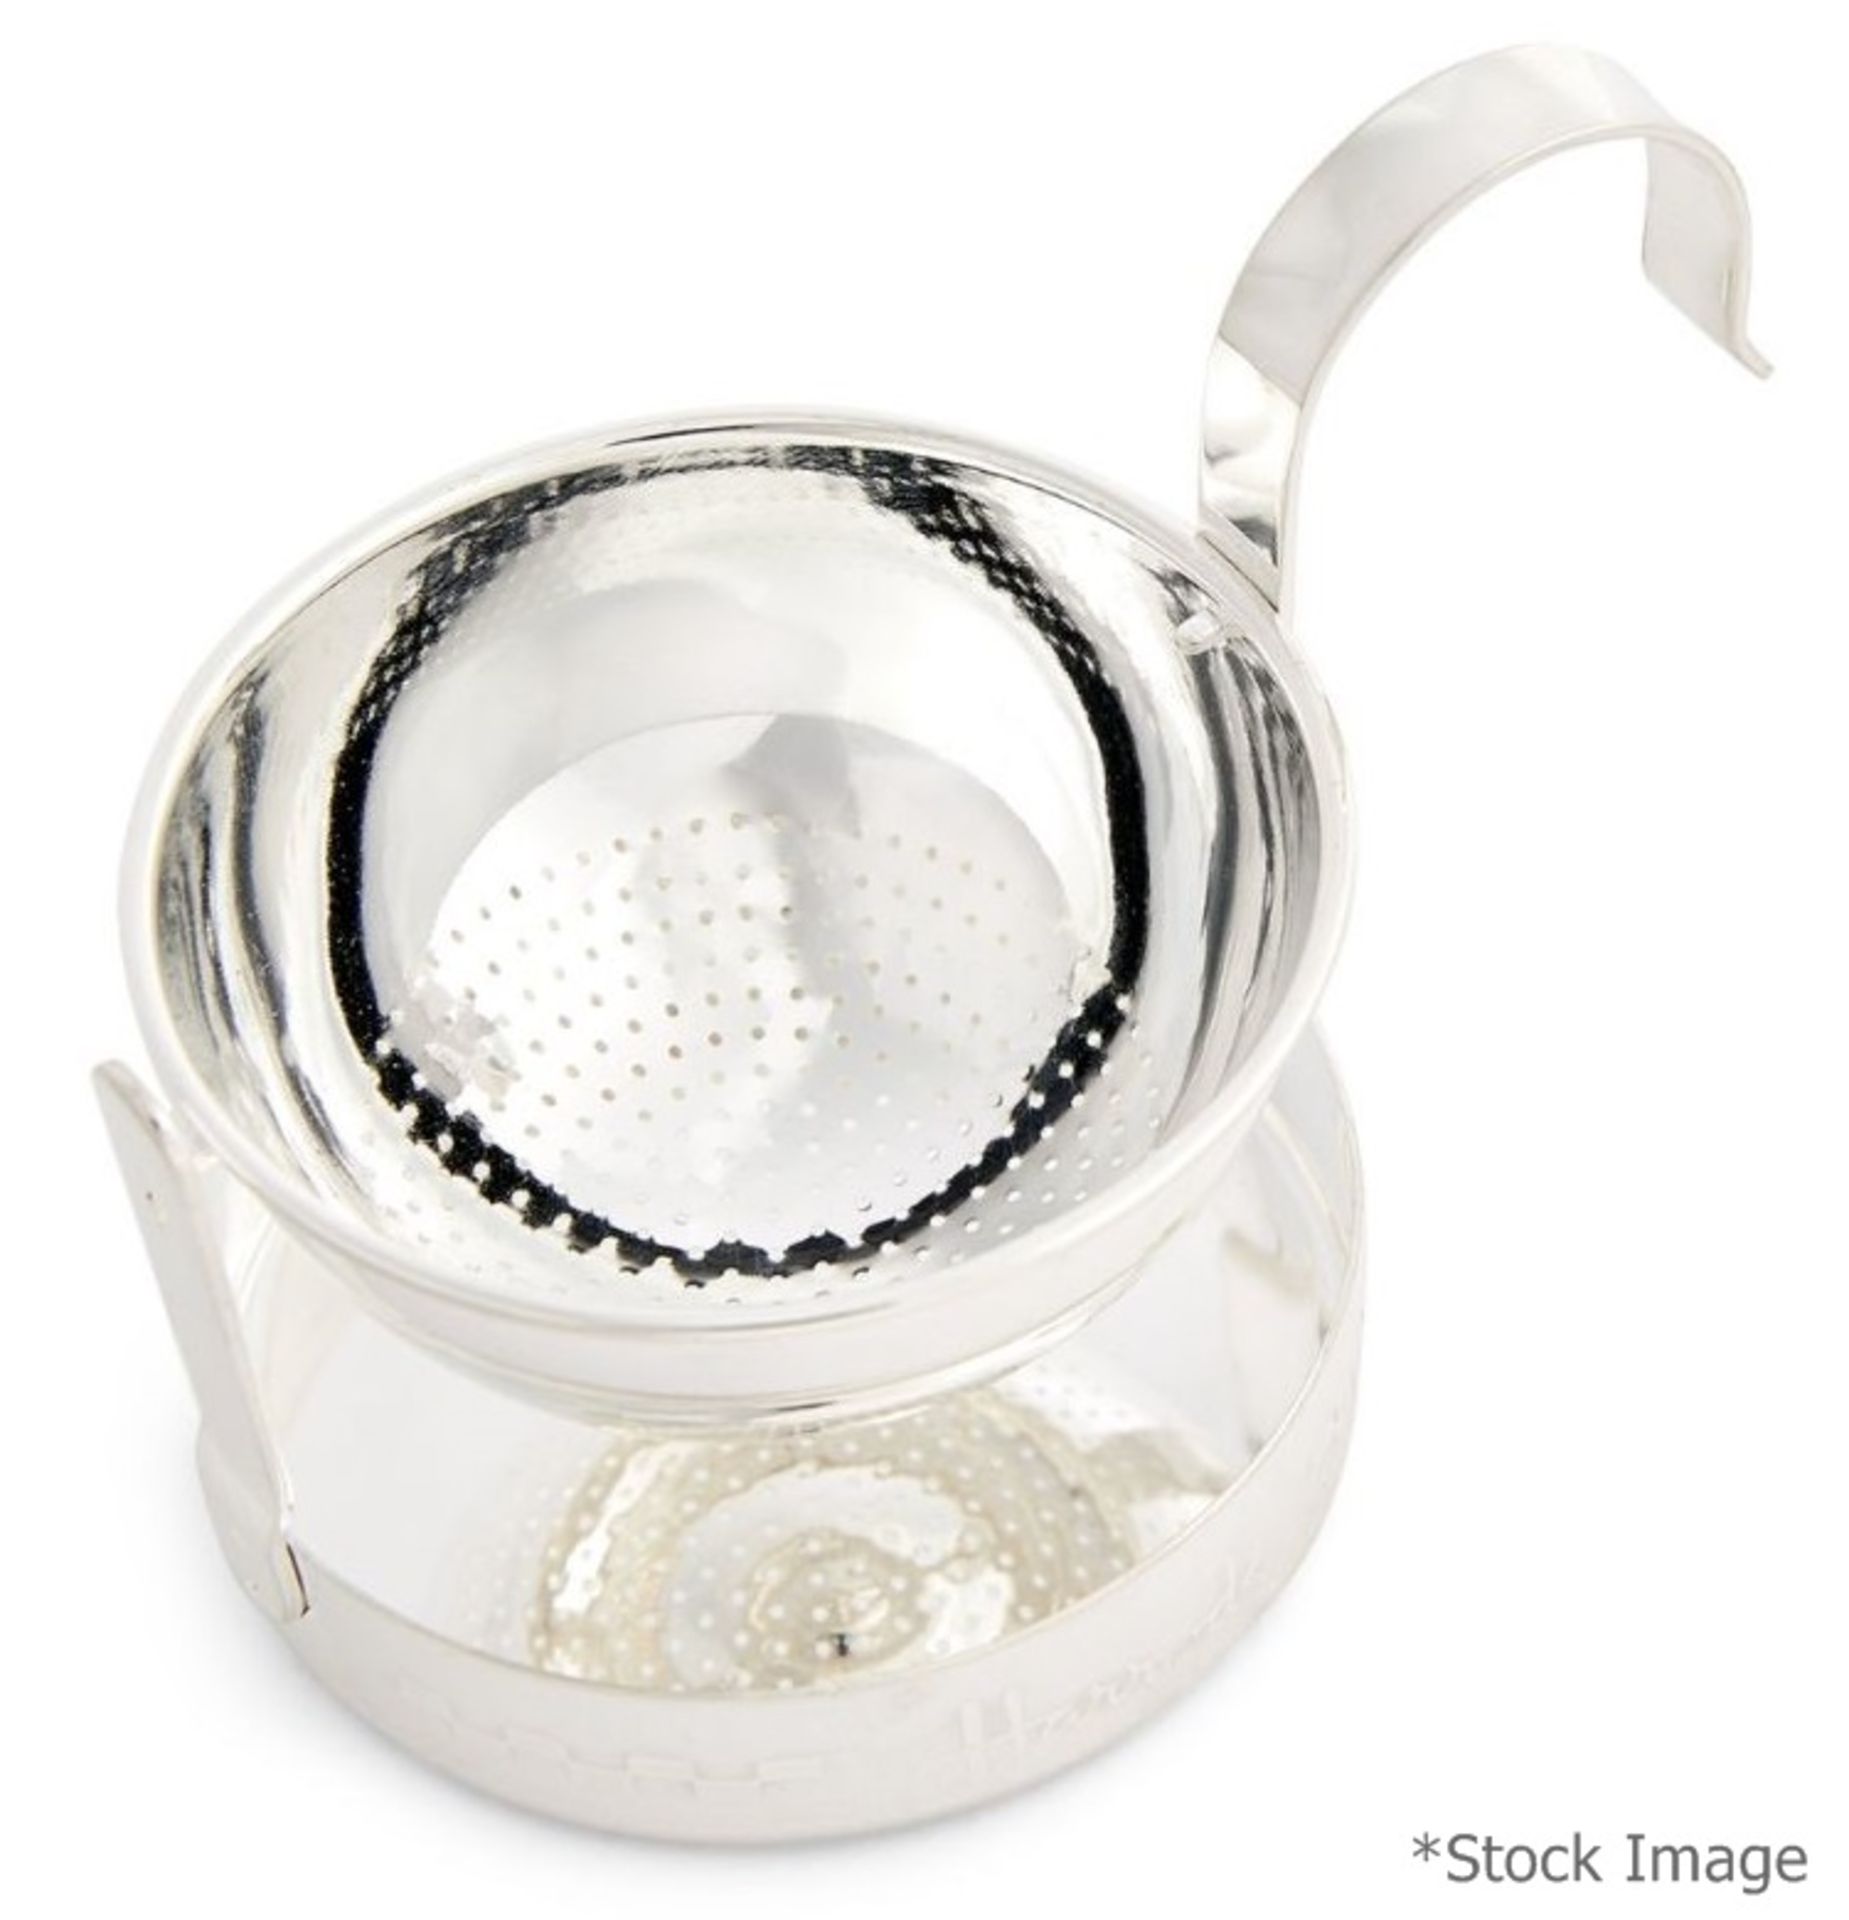 1 x HARRODS Silver-Plated Revolving Strainer - Unused Boxed Stock - Ref: HAS579/FEB22/WH2/C6 - CL987 - Image 2 of 6